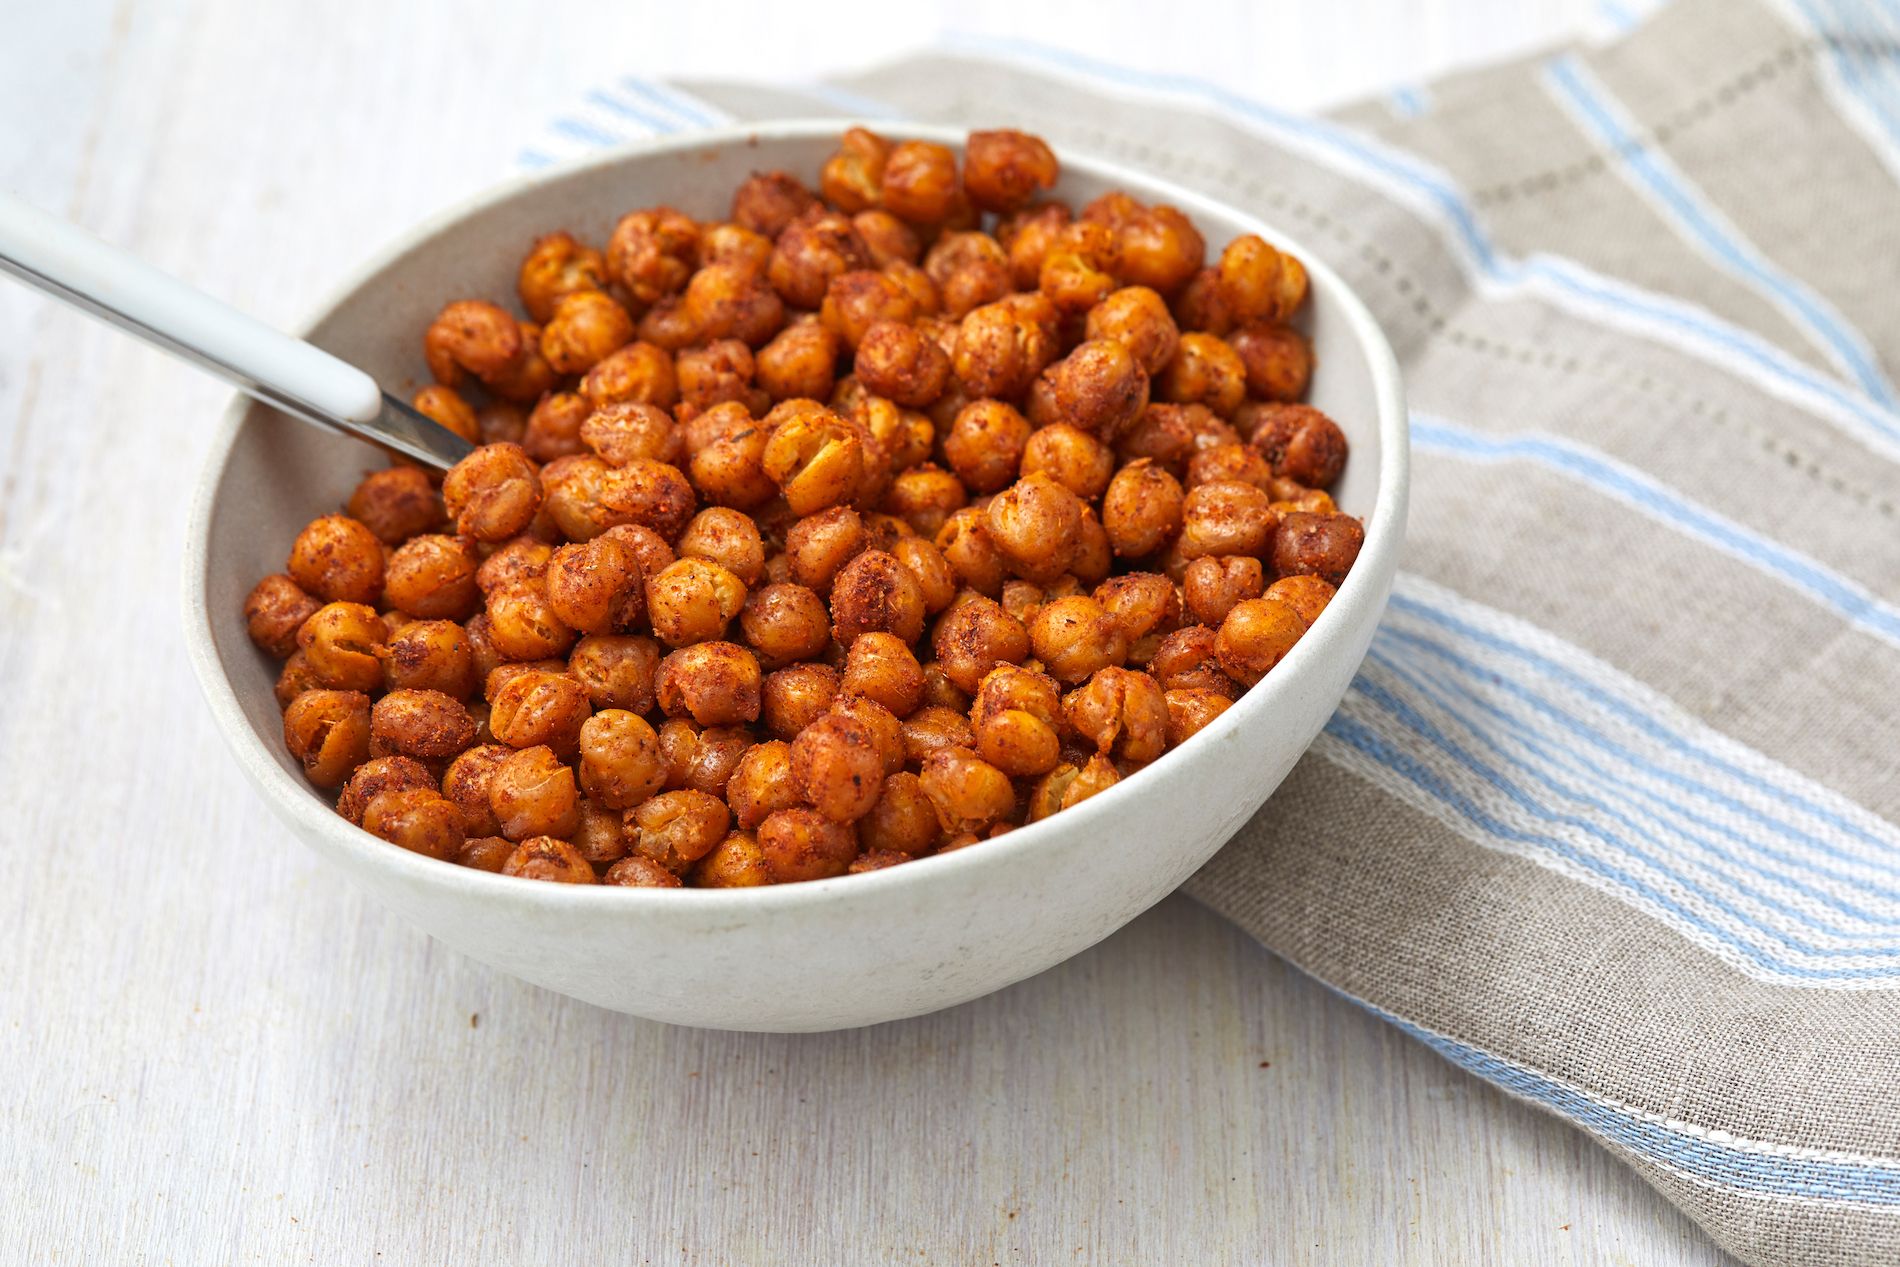 Best Roasted Chickpeas Recipe - How To Make Roasted Chickpeas